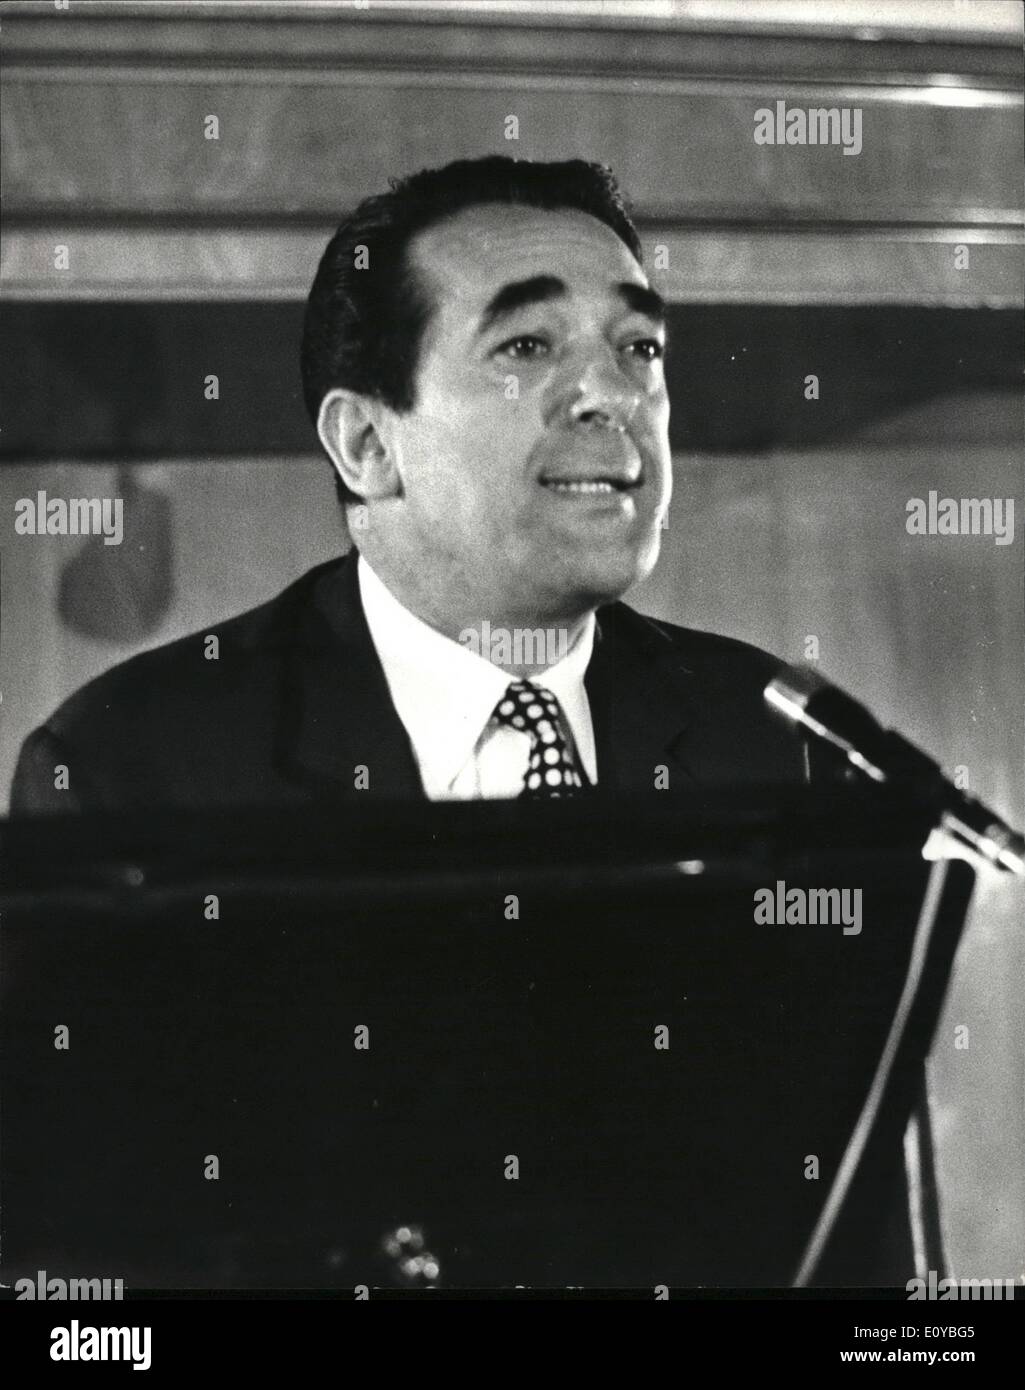 Oct. 10, 1969 - Uproar At Meeting Of Pergmon Press Shareholders At The Connaught Rooms: As Mr. Robert Maxwell, Labour MP and Chairman of Porgam,en Press was about open the meeeting of shareholders who were their to decide whether Mr. Saul Steineberg's Lease team should take over management central of Proamen from Mr. Maxwell, four men jump onto the Platform and one of them a solietoer,. tried to speak the meeting. After a few minutes he left the platform as the microphones went dead and the shareholders were chanting and hand-clappio with his three Colleagues. Photo Shows Mr Stock Photo